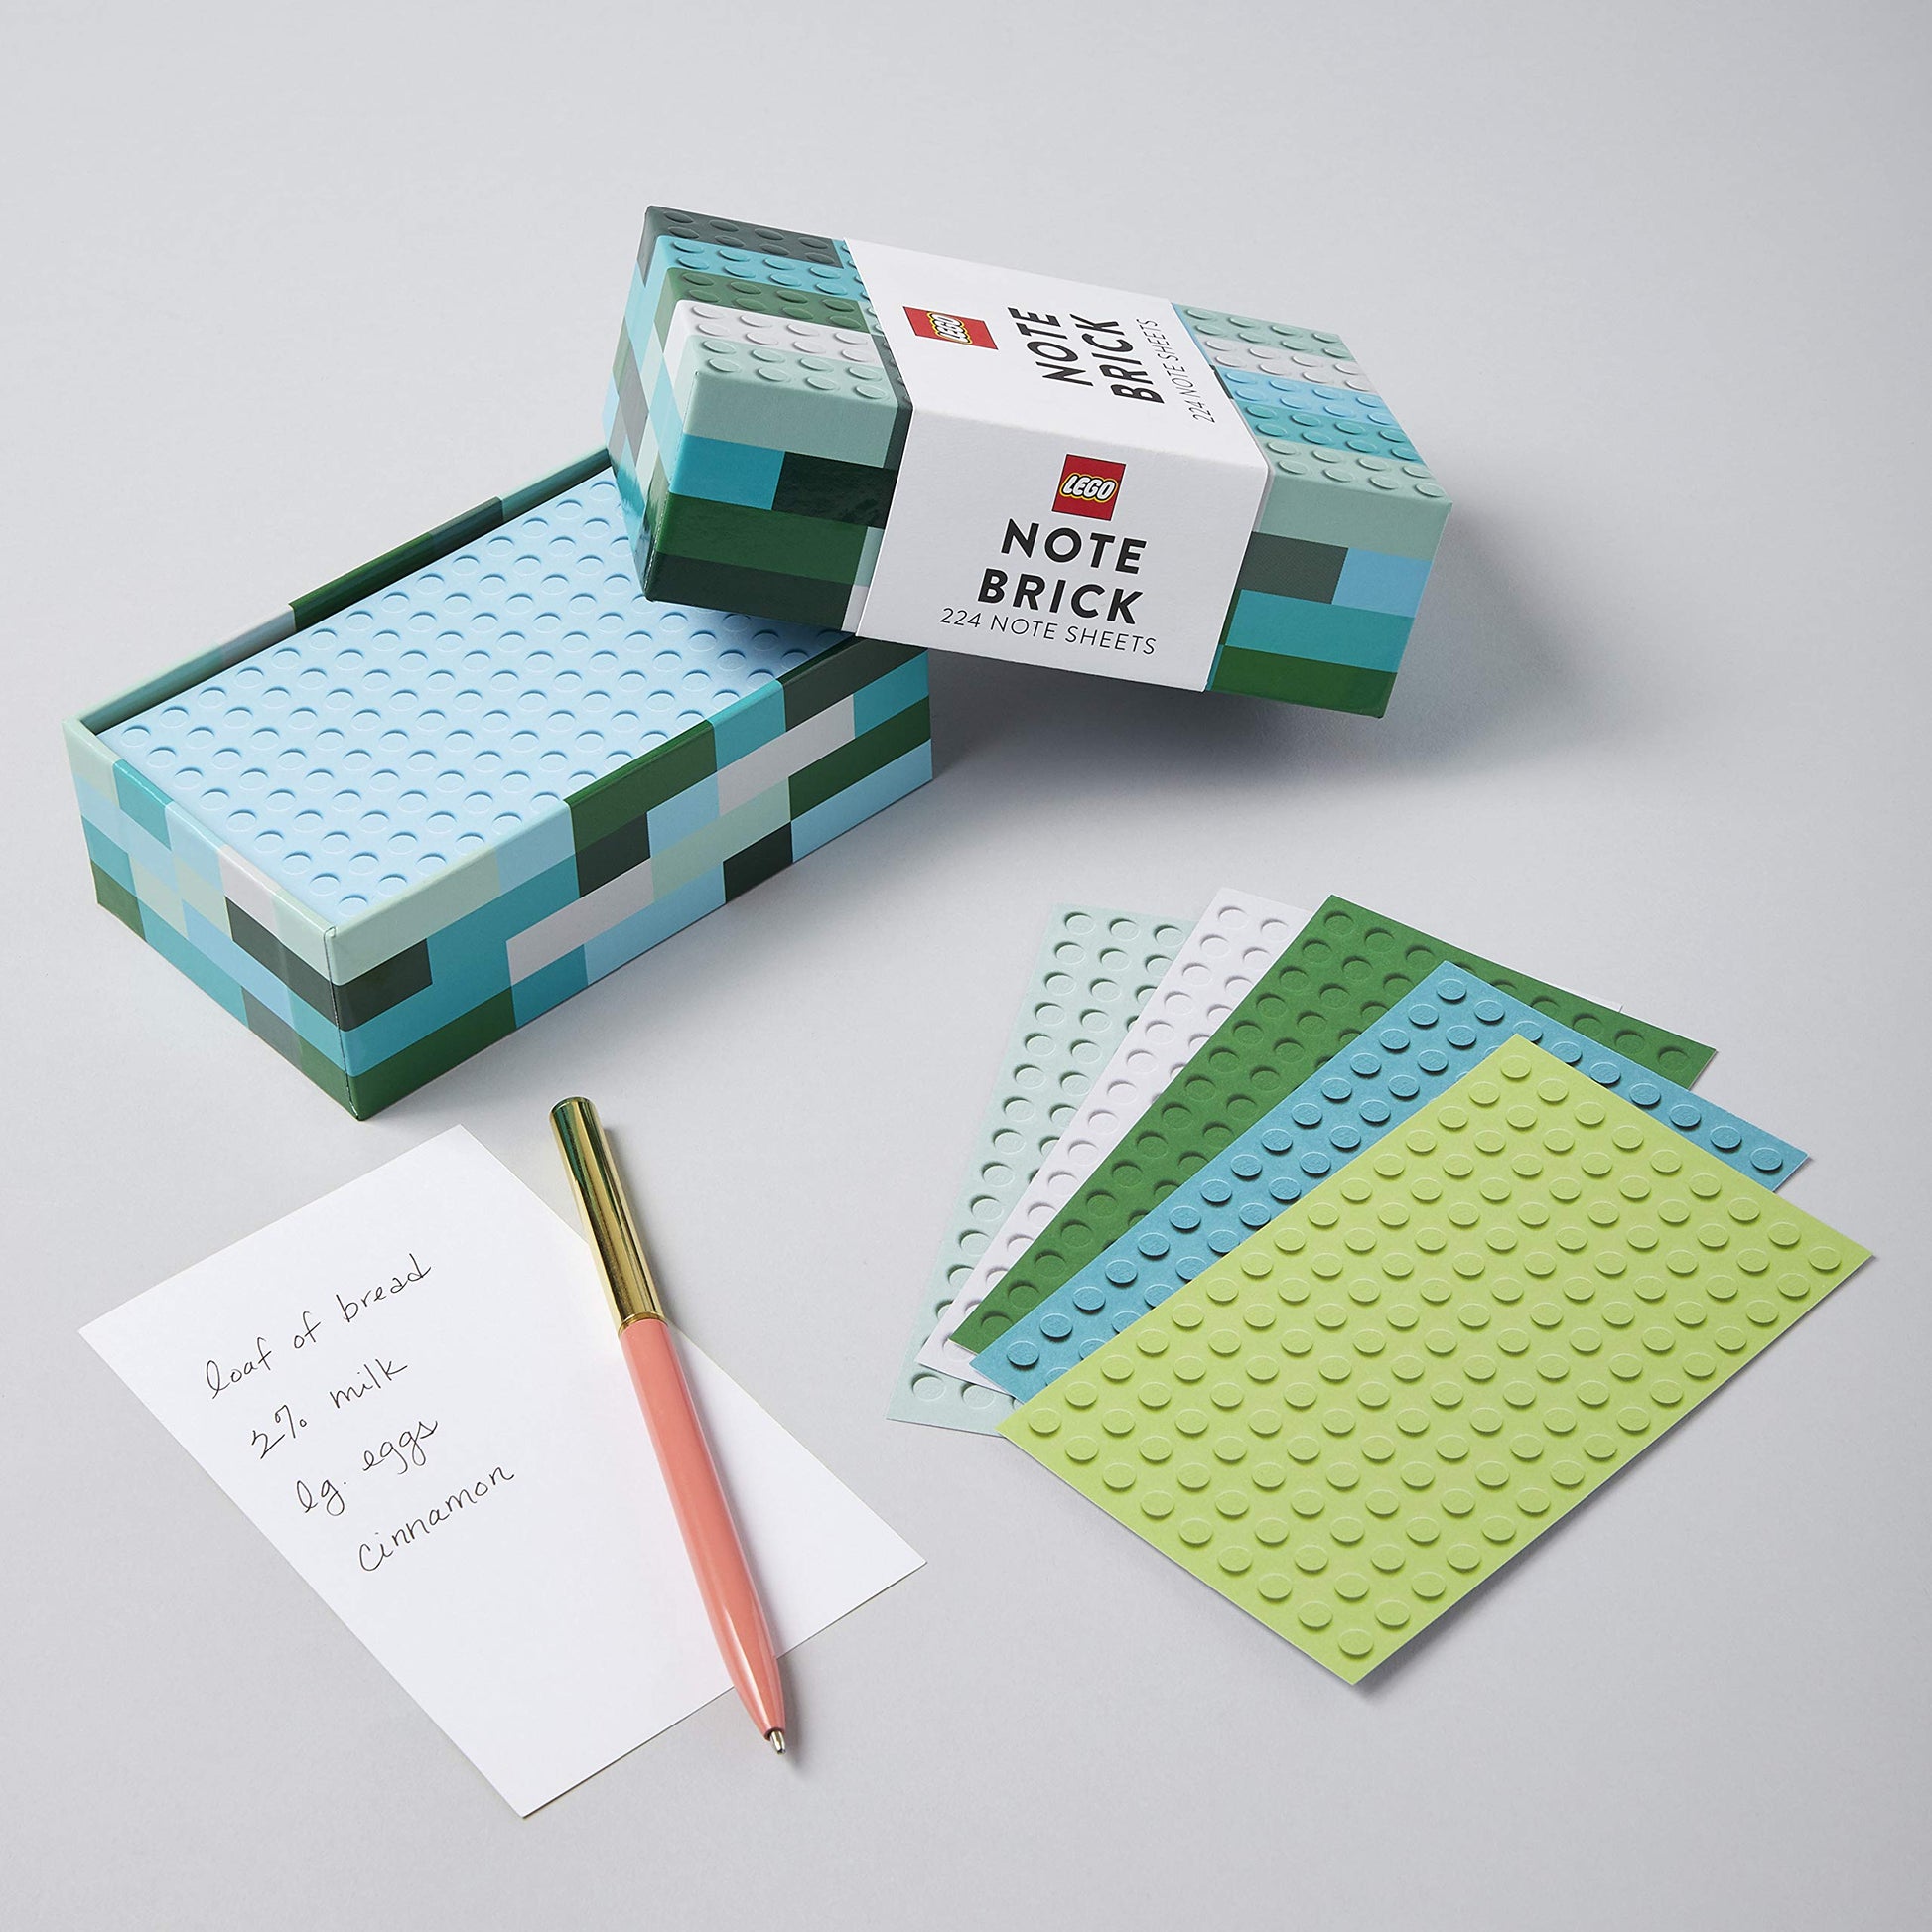 lego designed box with lid off-set to show note paper inside and sheets of note paper with lego design fanned out with a pen.